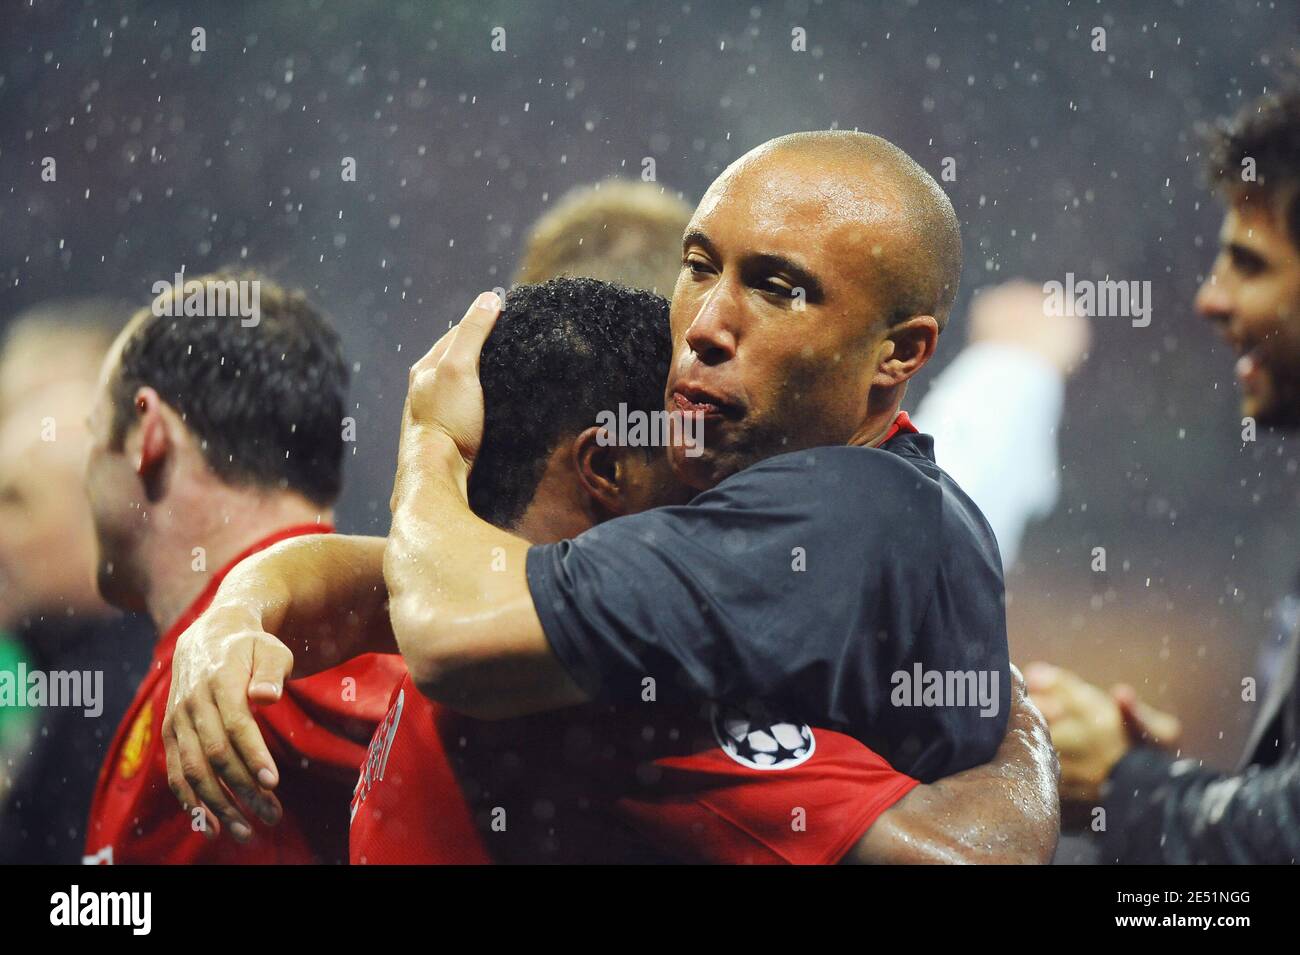 Manchester United's Patrice Evra and Mikael Silvestre celebrates after Chelsea's Nicolas Anelka misses his penaty and offers the victory in Manchester during the UEFA Champions League Final Soccer match, Manchester United vs Chelsea at the Luzhniki Stadium in Moscow, Russia on May 21, 2008. The match ended in a 1-1 draw and Manchester United defeats 6-5, Chelsea in the penalty shootout. Photo by Steeve McMay/Cameleon/ABACAPRESS.COM Stock Photo